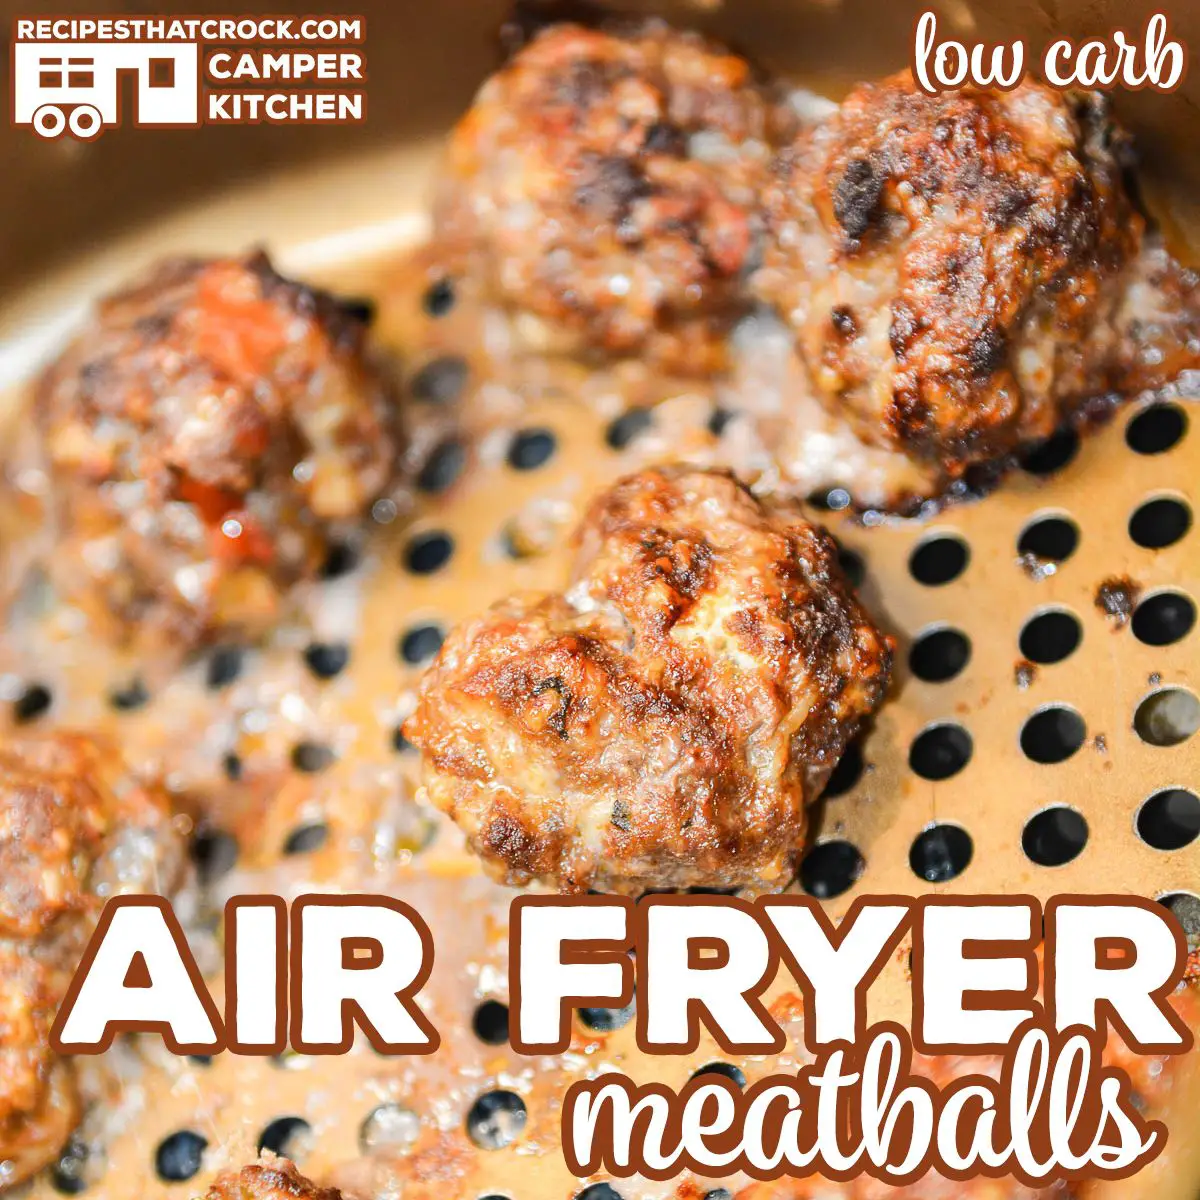 Are you looking for an easy way to make homemade meatballs? Our Air ...